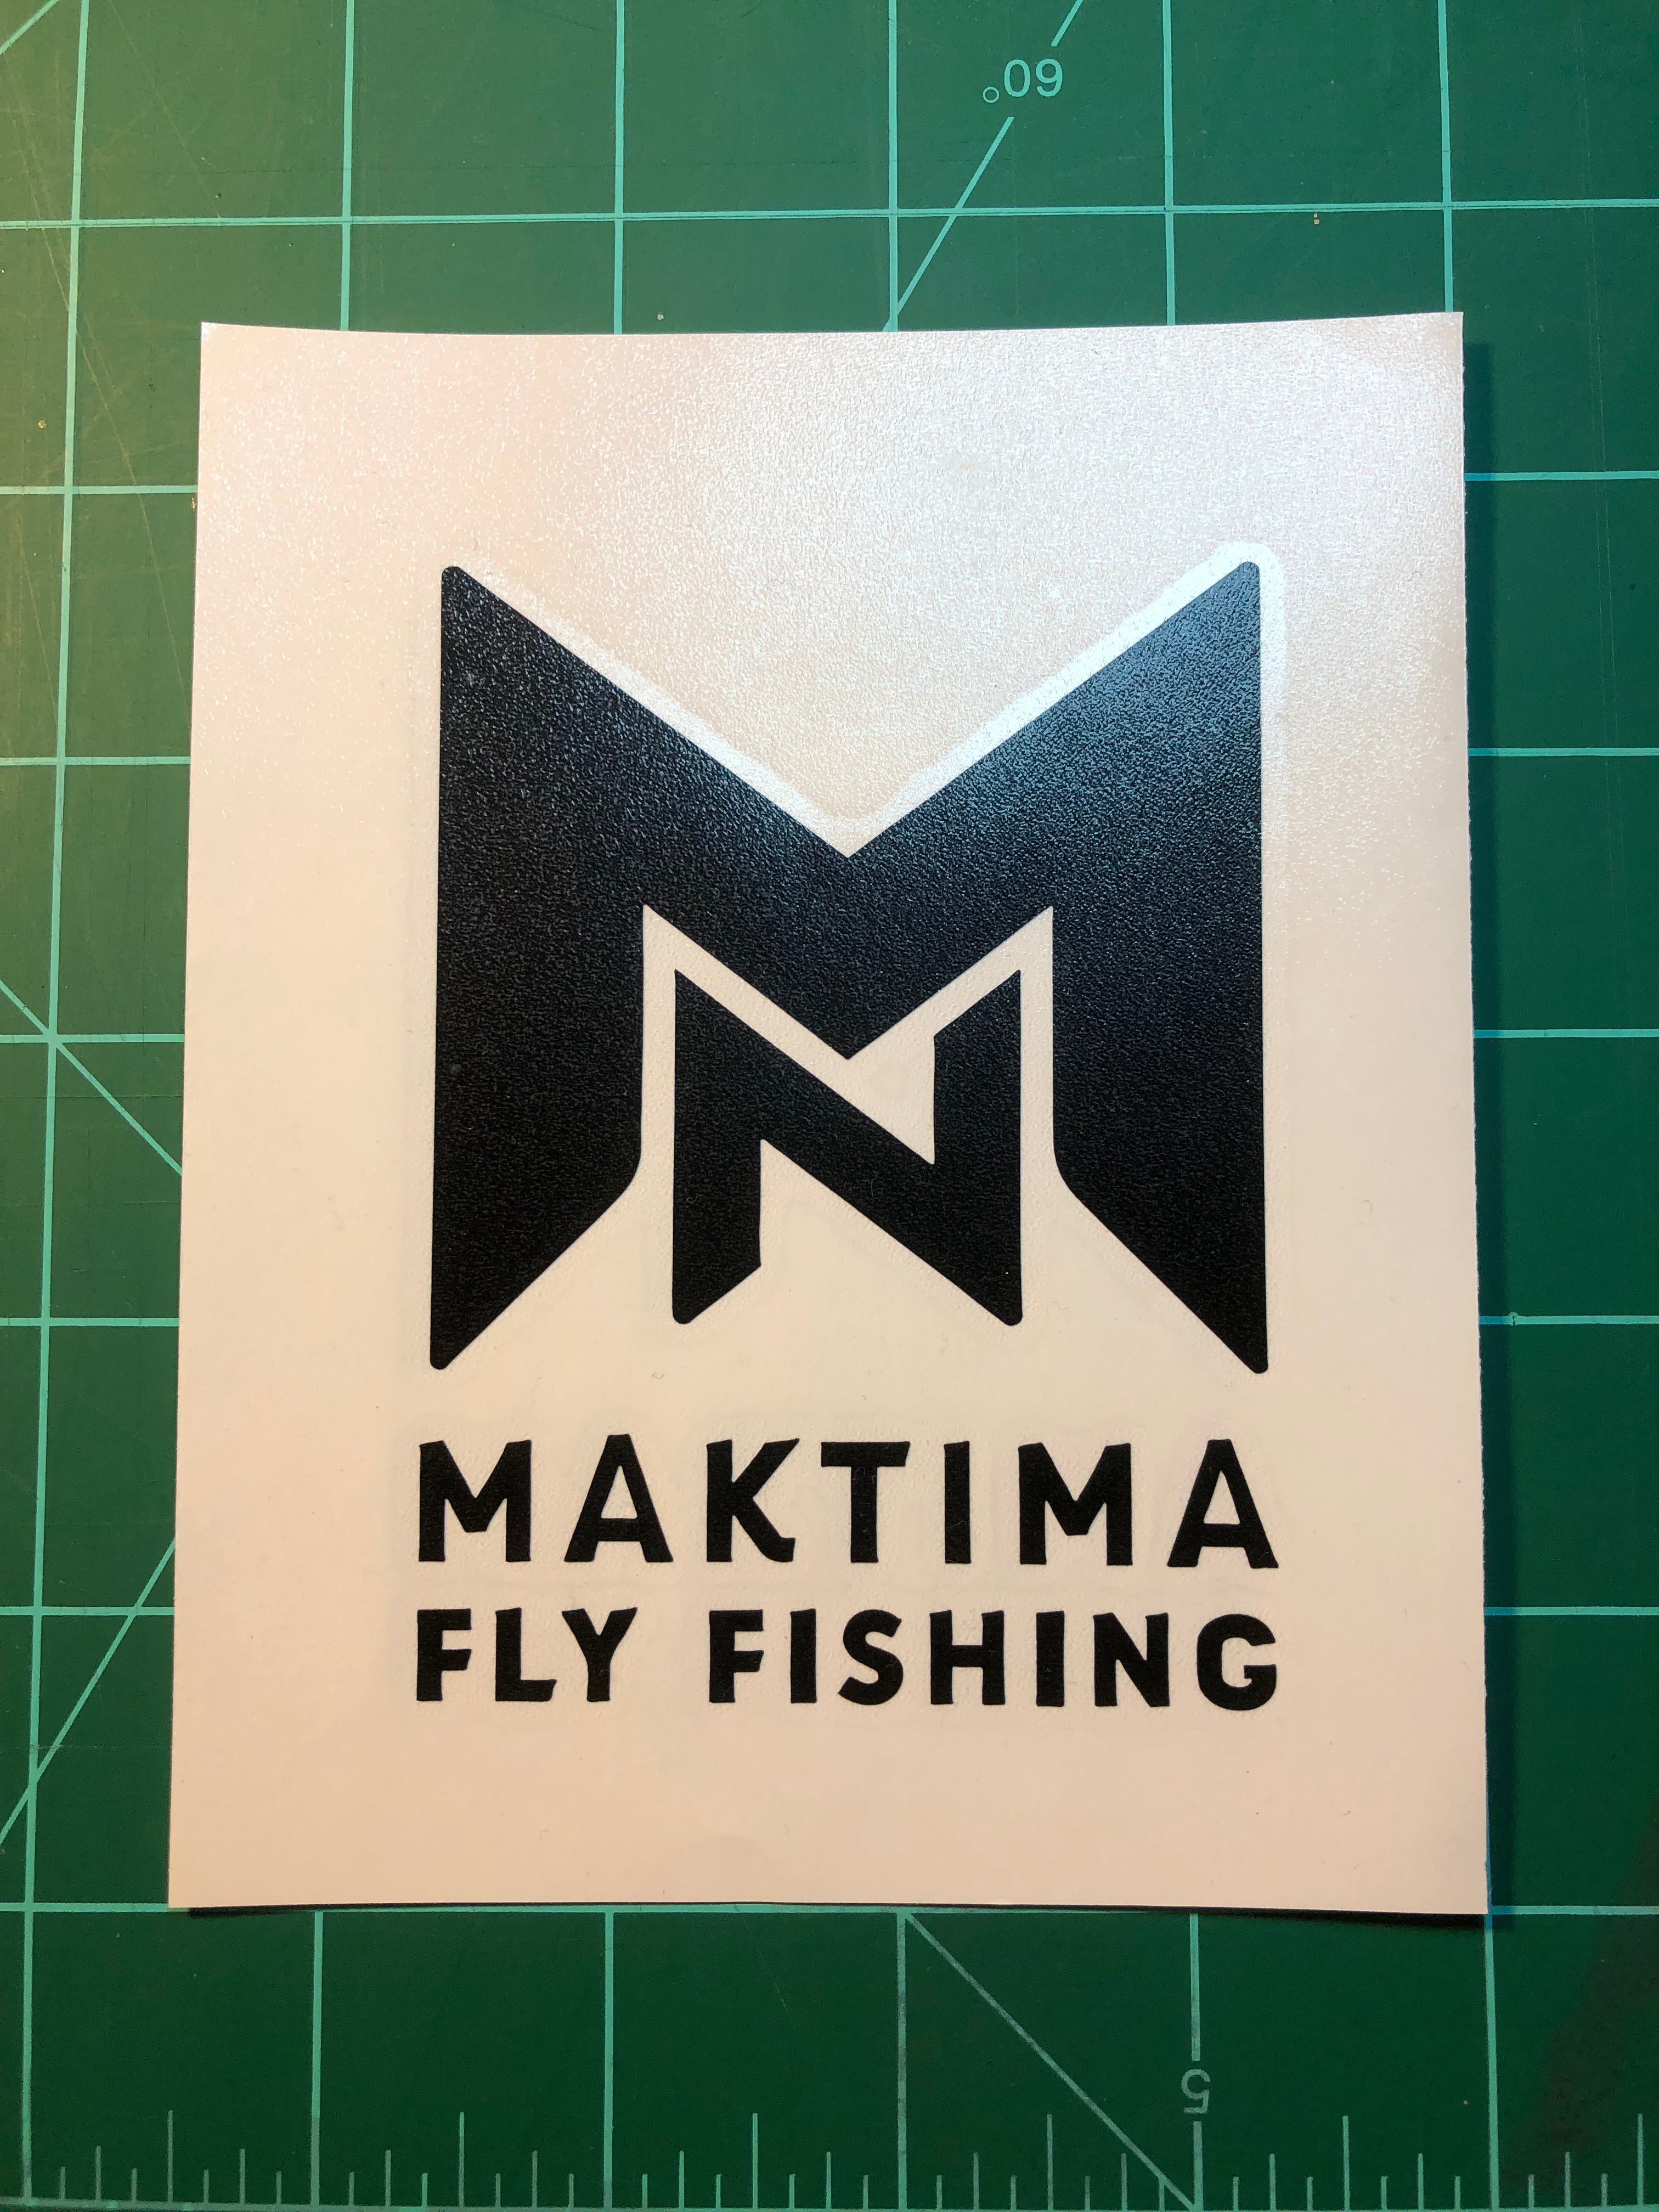 Indigenous Fly Fishers Logo stickers